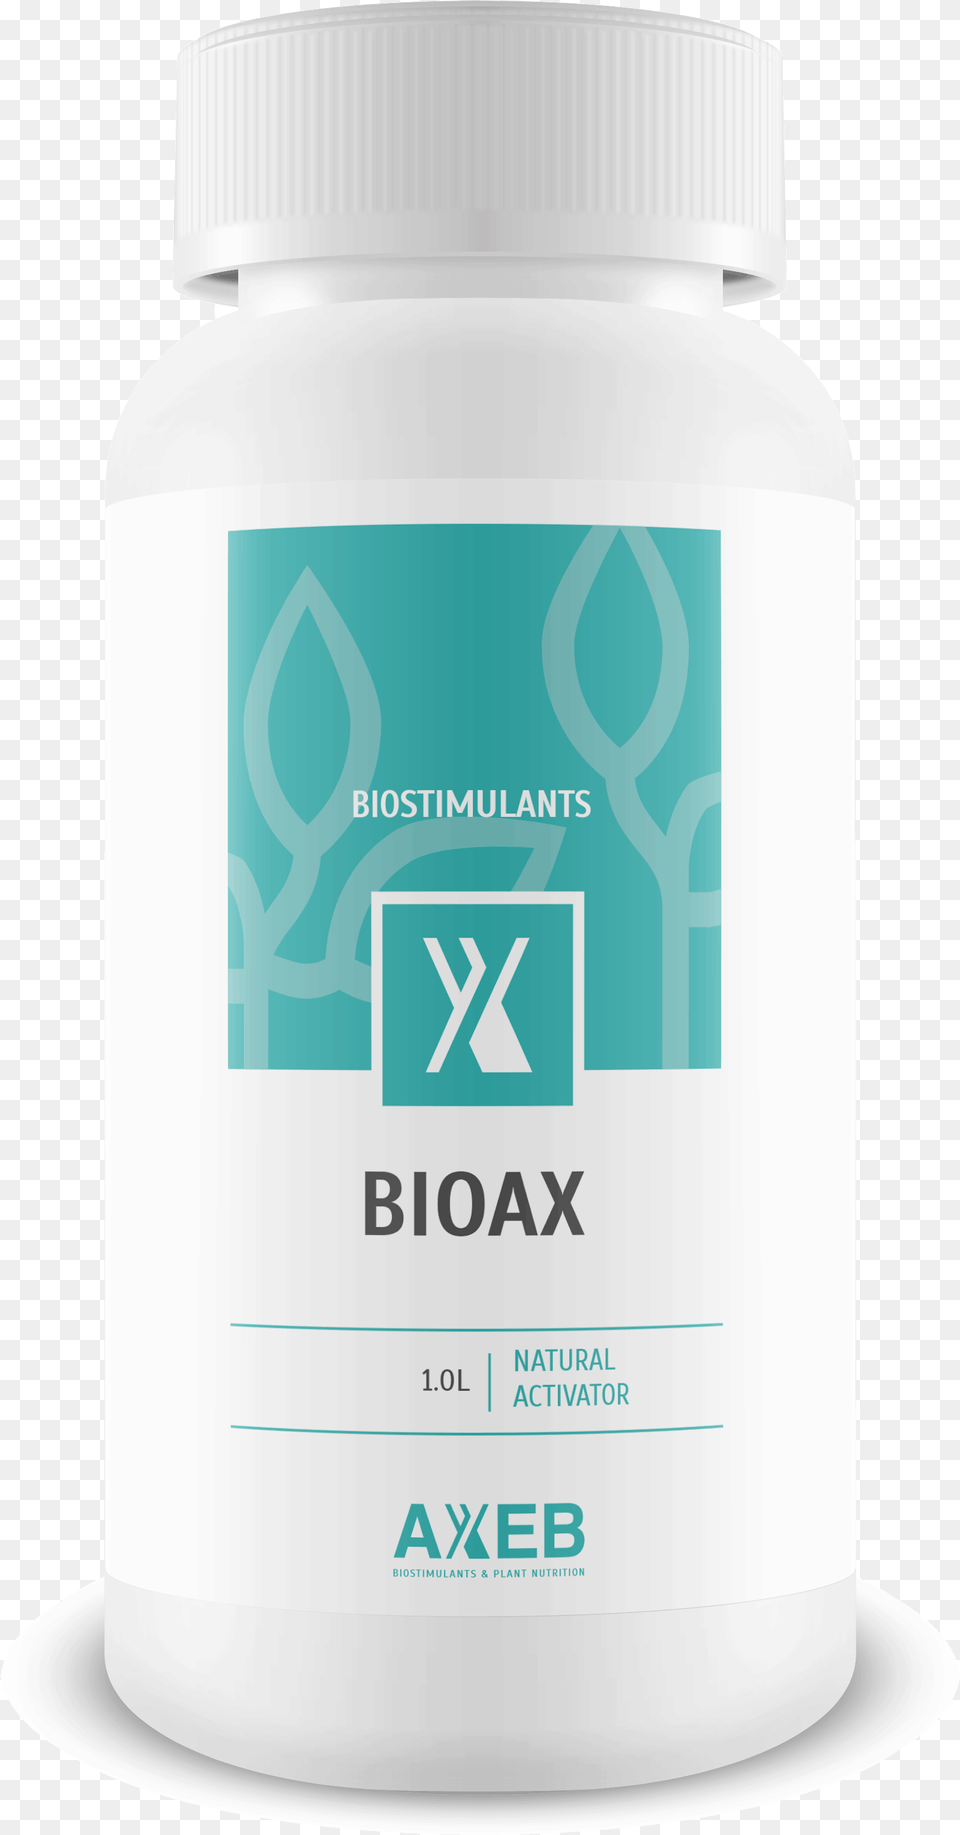 Bioax Biostimulants Specialized Fertilizers Plant Nutrition Biostimulant Product, Herbal, Herbs, Bottle, Shaker Png Image